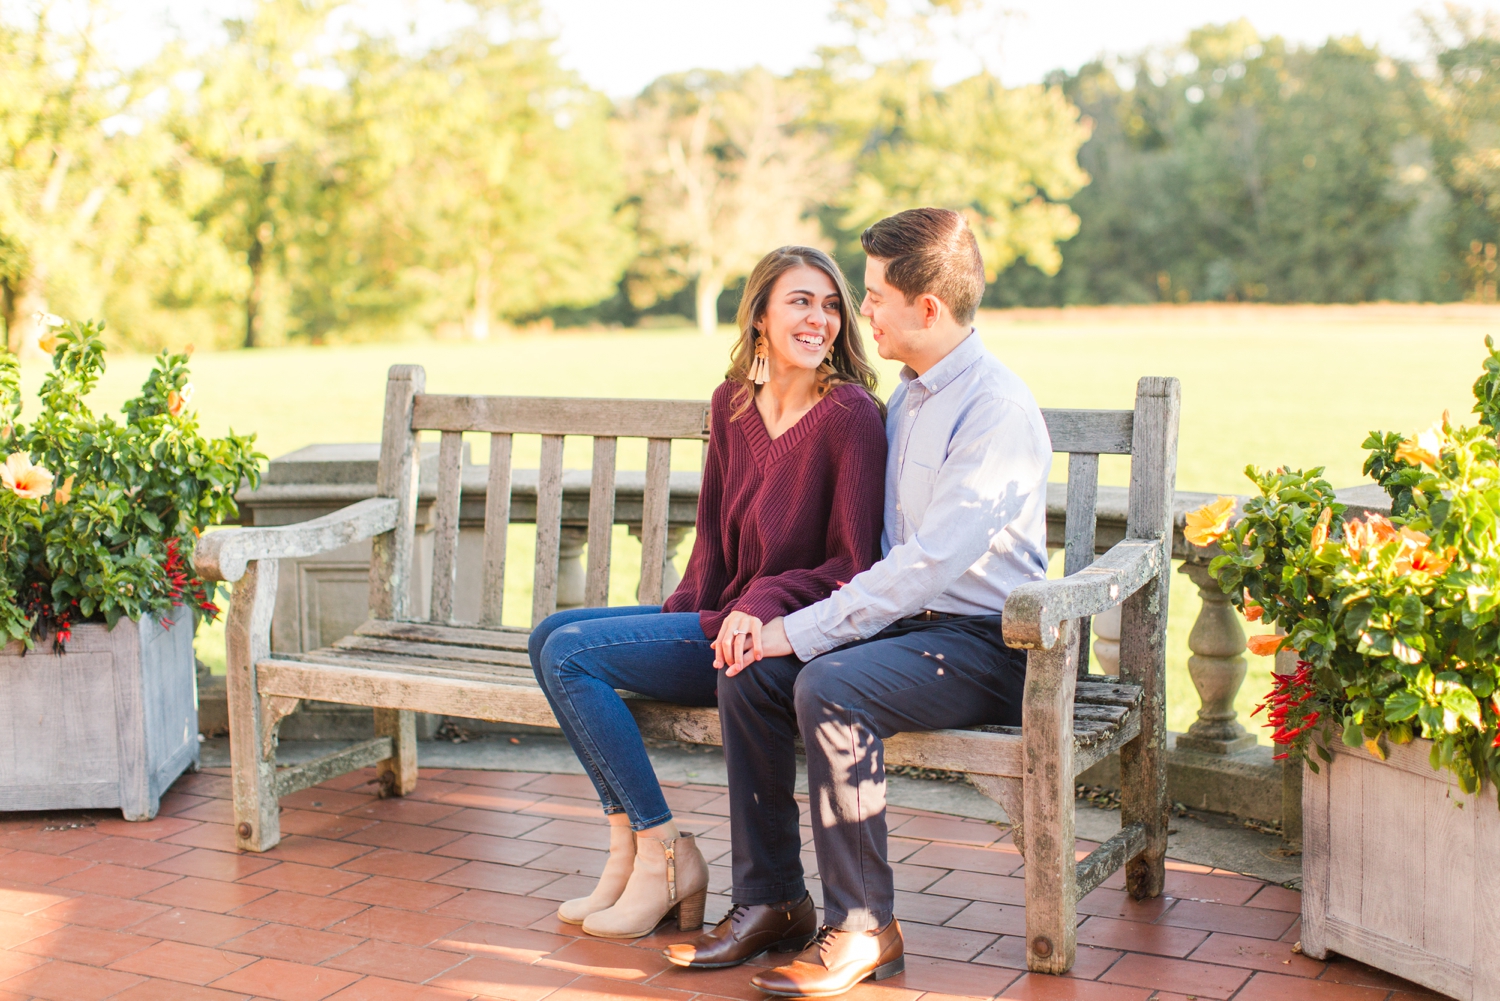 waveny-park-engagement-session-new-canaan-connecticut-top-wedding-photographer-shaina-lee-photography-photo